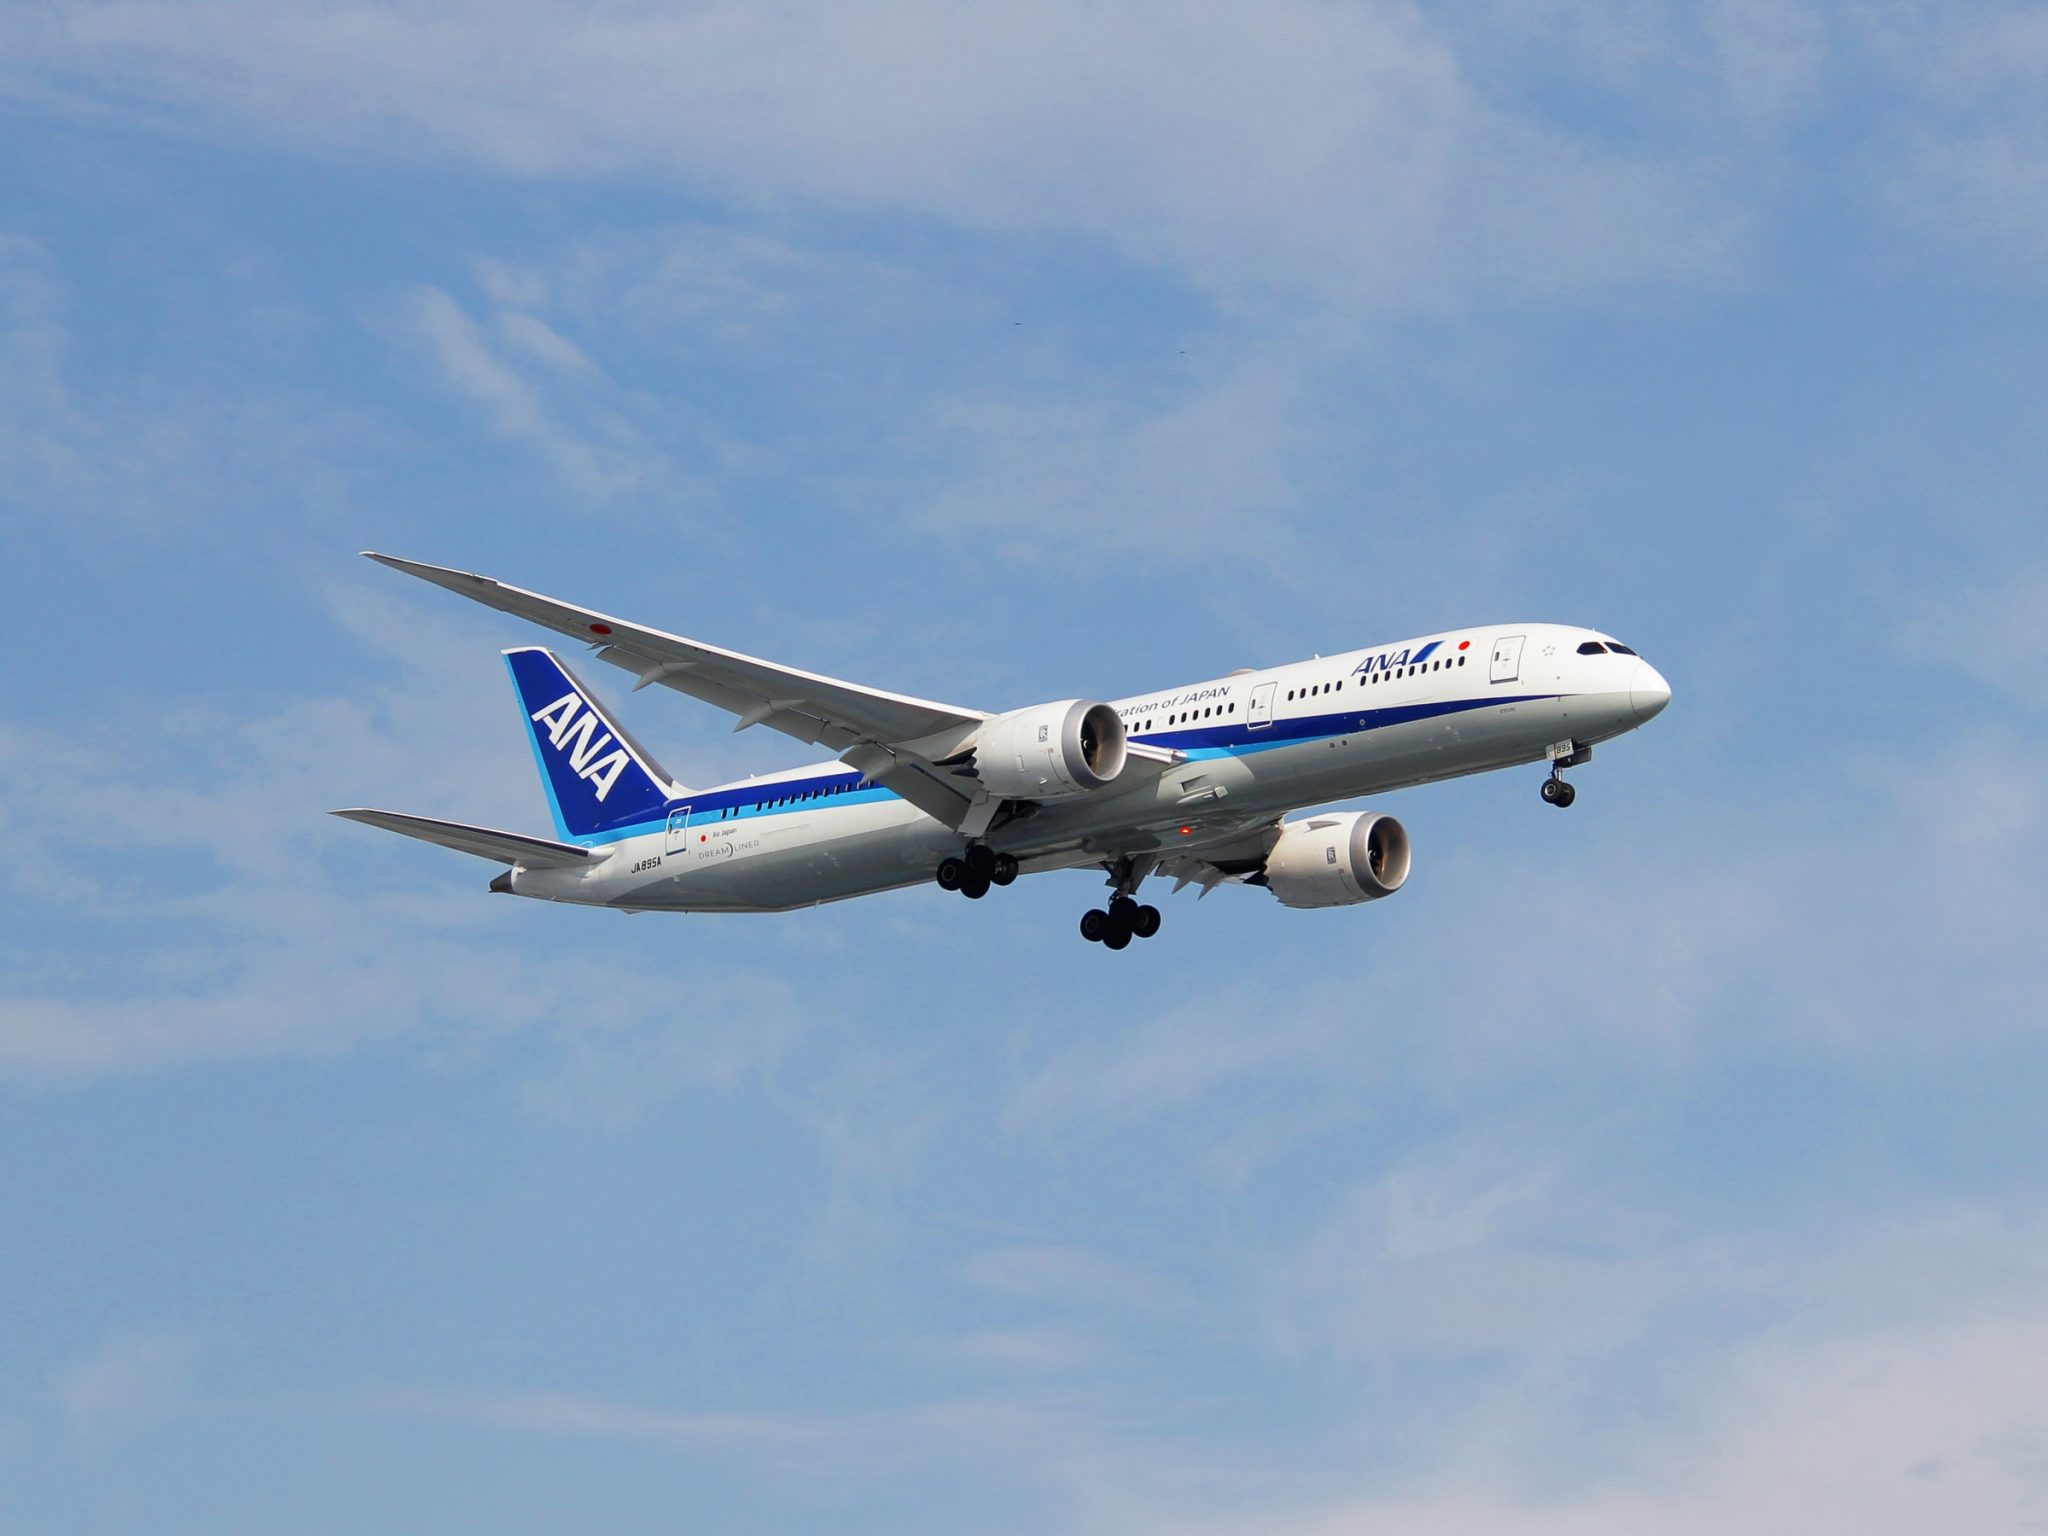 ANA normally uses Russian airspace for its European flights.